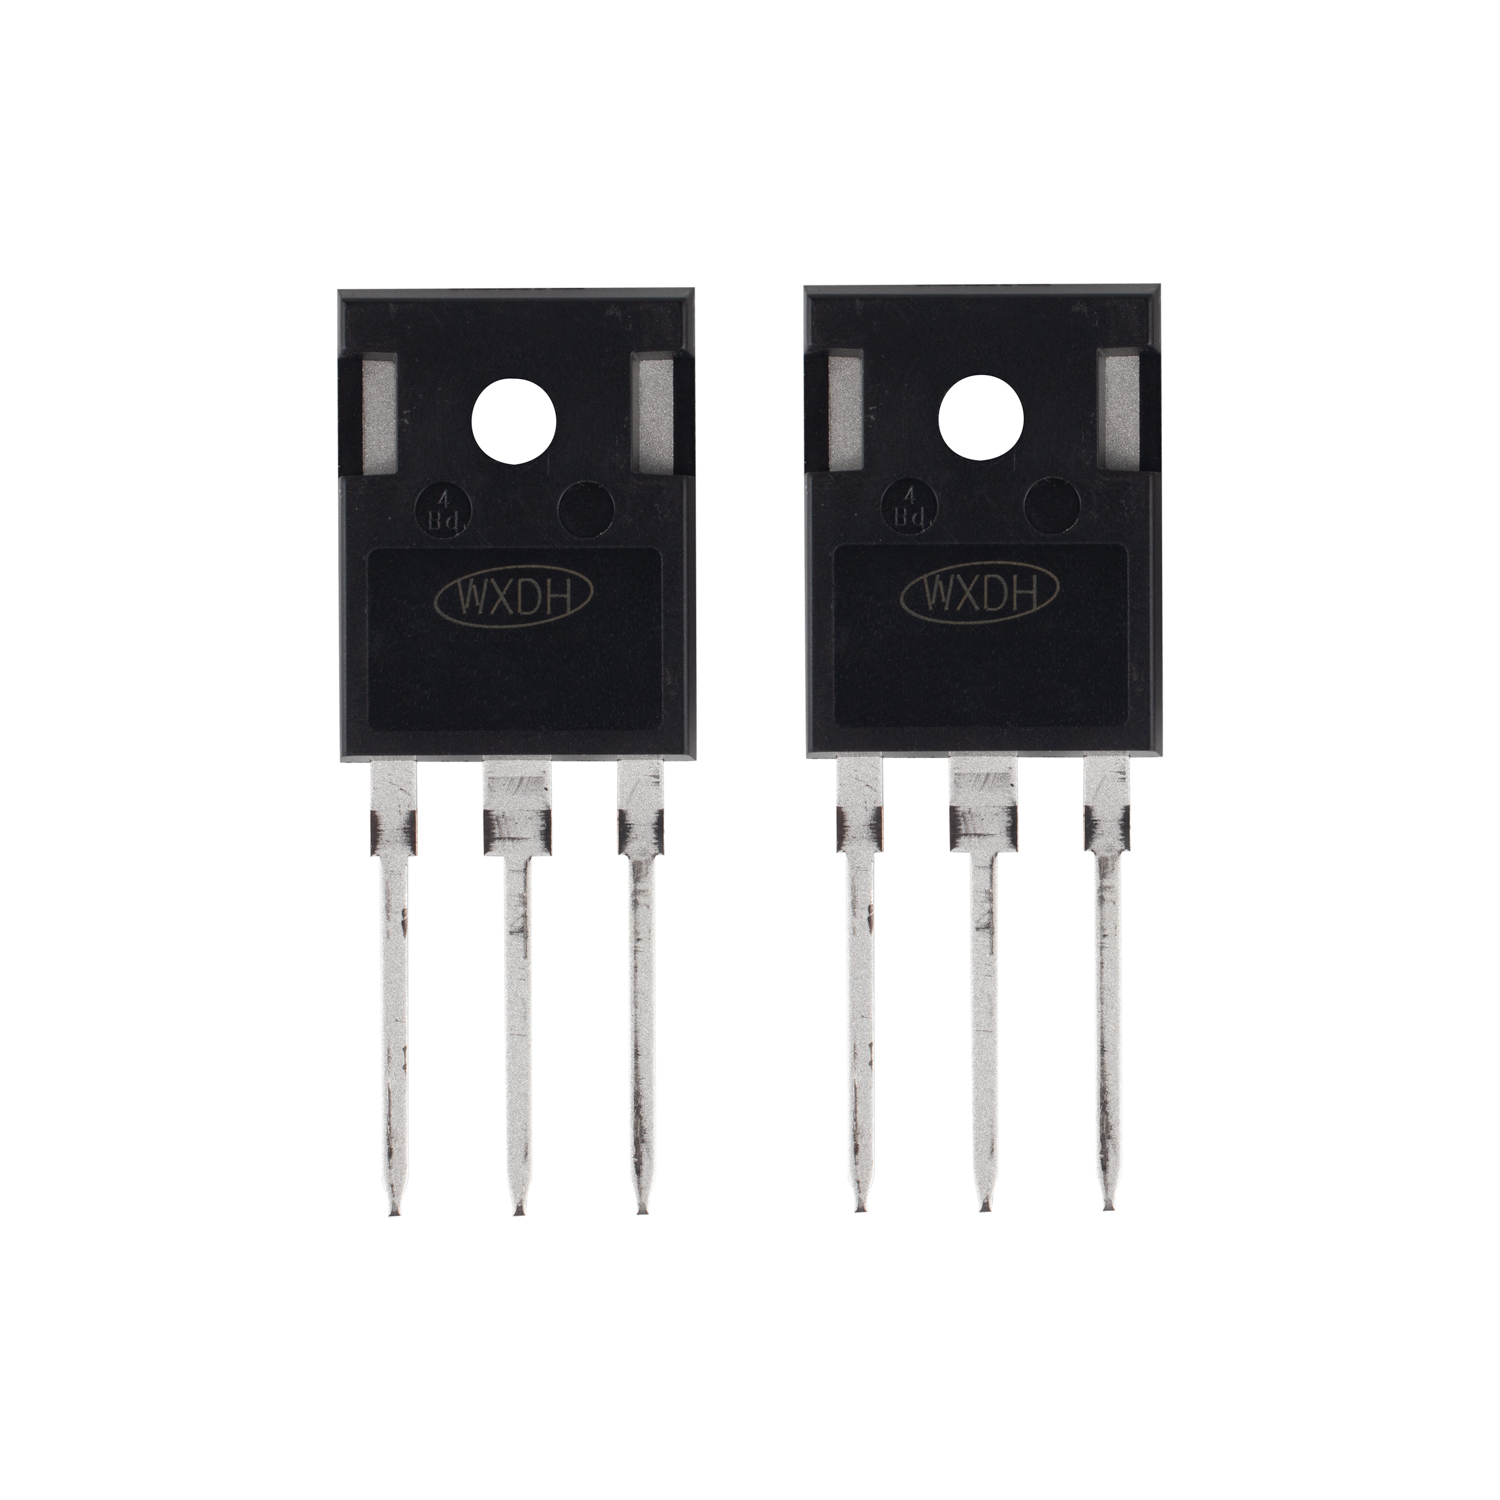 7.0A 1700V N-channel SiC Power MOSFET DCC650M170G1 TO-247